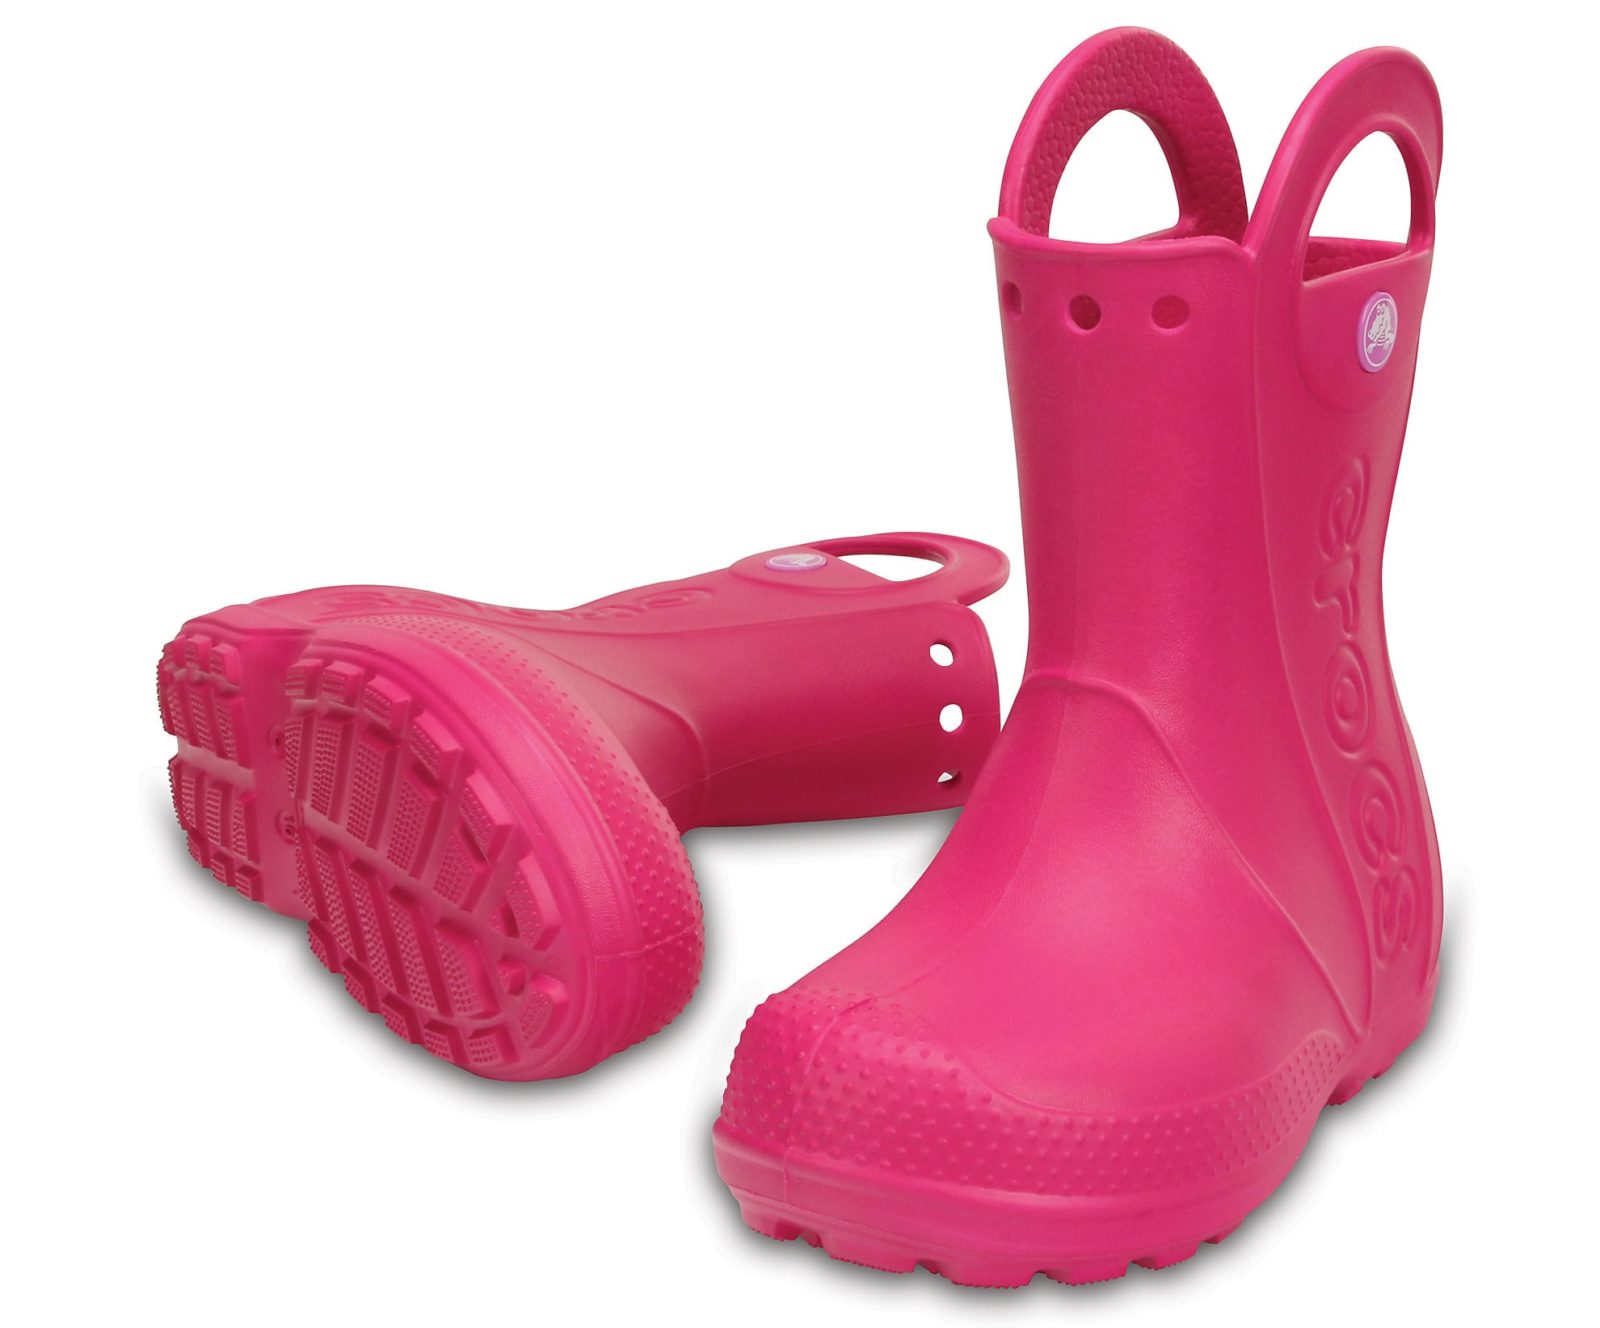 The Cutest Girly Rain Boots For Girls, Toddlers & Babies - The Mood Guide